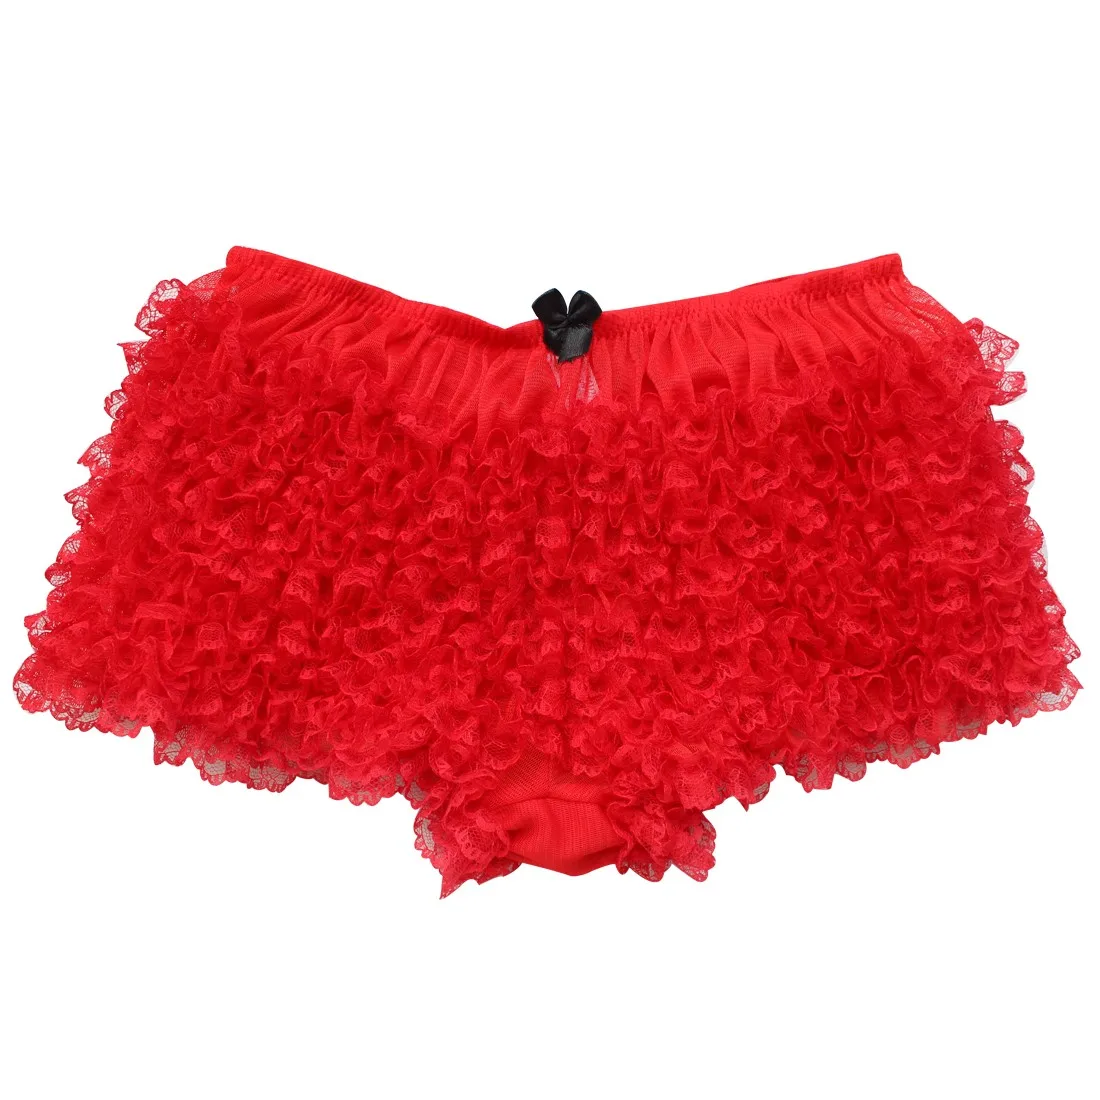 https://ae01.alicdn.com/kf/H2b387c8ce77245288b67117bc1d9c412S/Womens-Erotic-Lingerie-Underwear-Ruffled-Lace-Bow-Bloomers-Knickers-Sexy-Panties-Undershorts-Wet-Look-Party-Stage.jpg